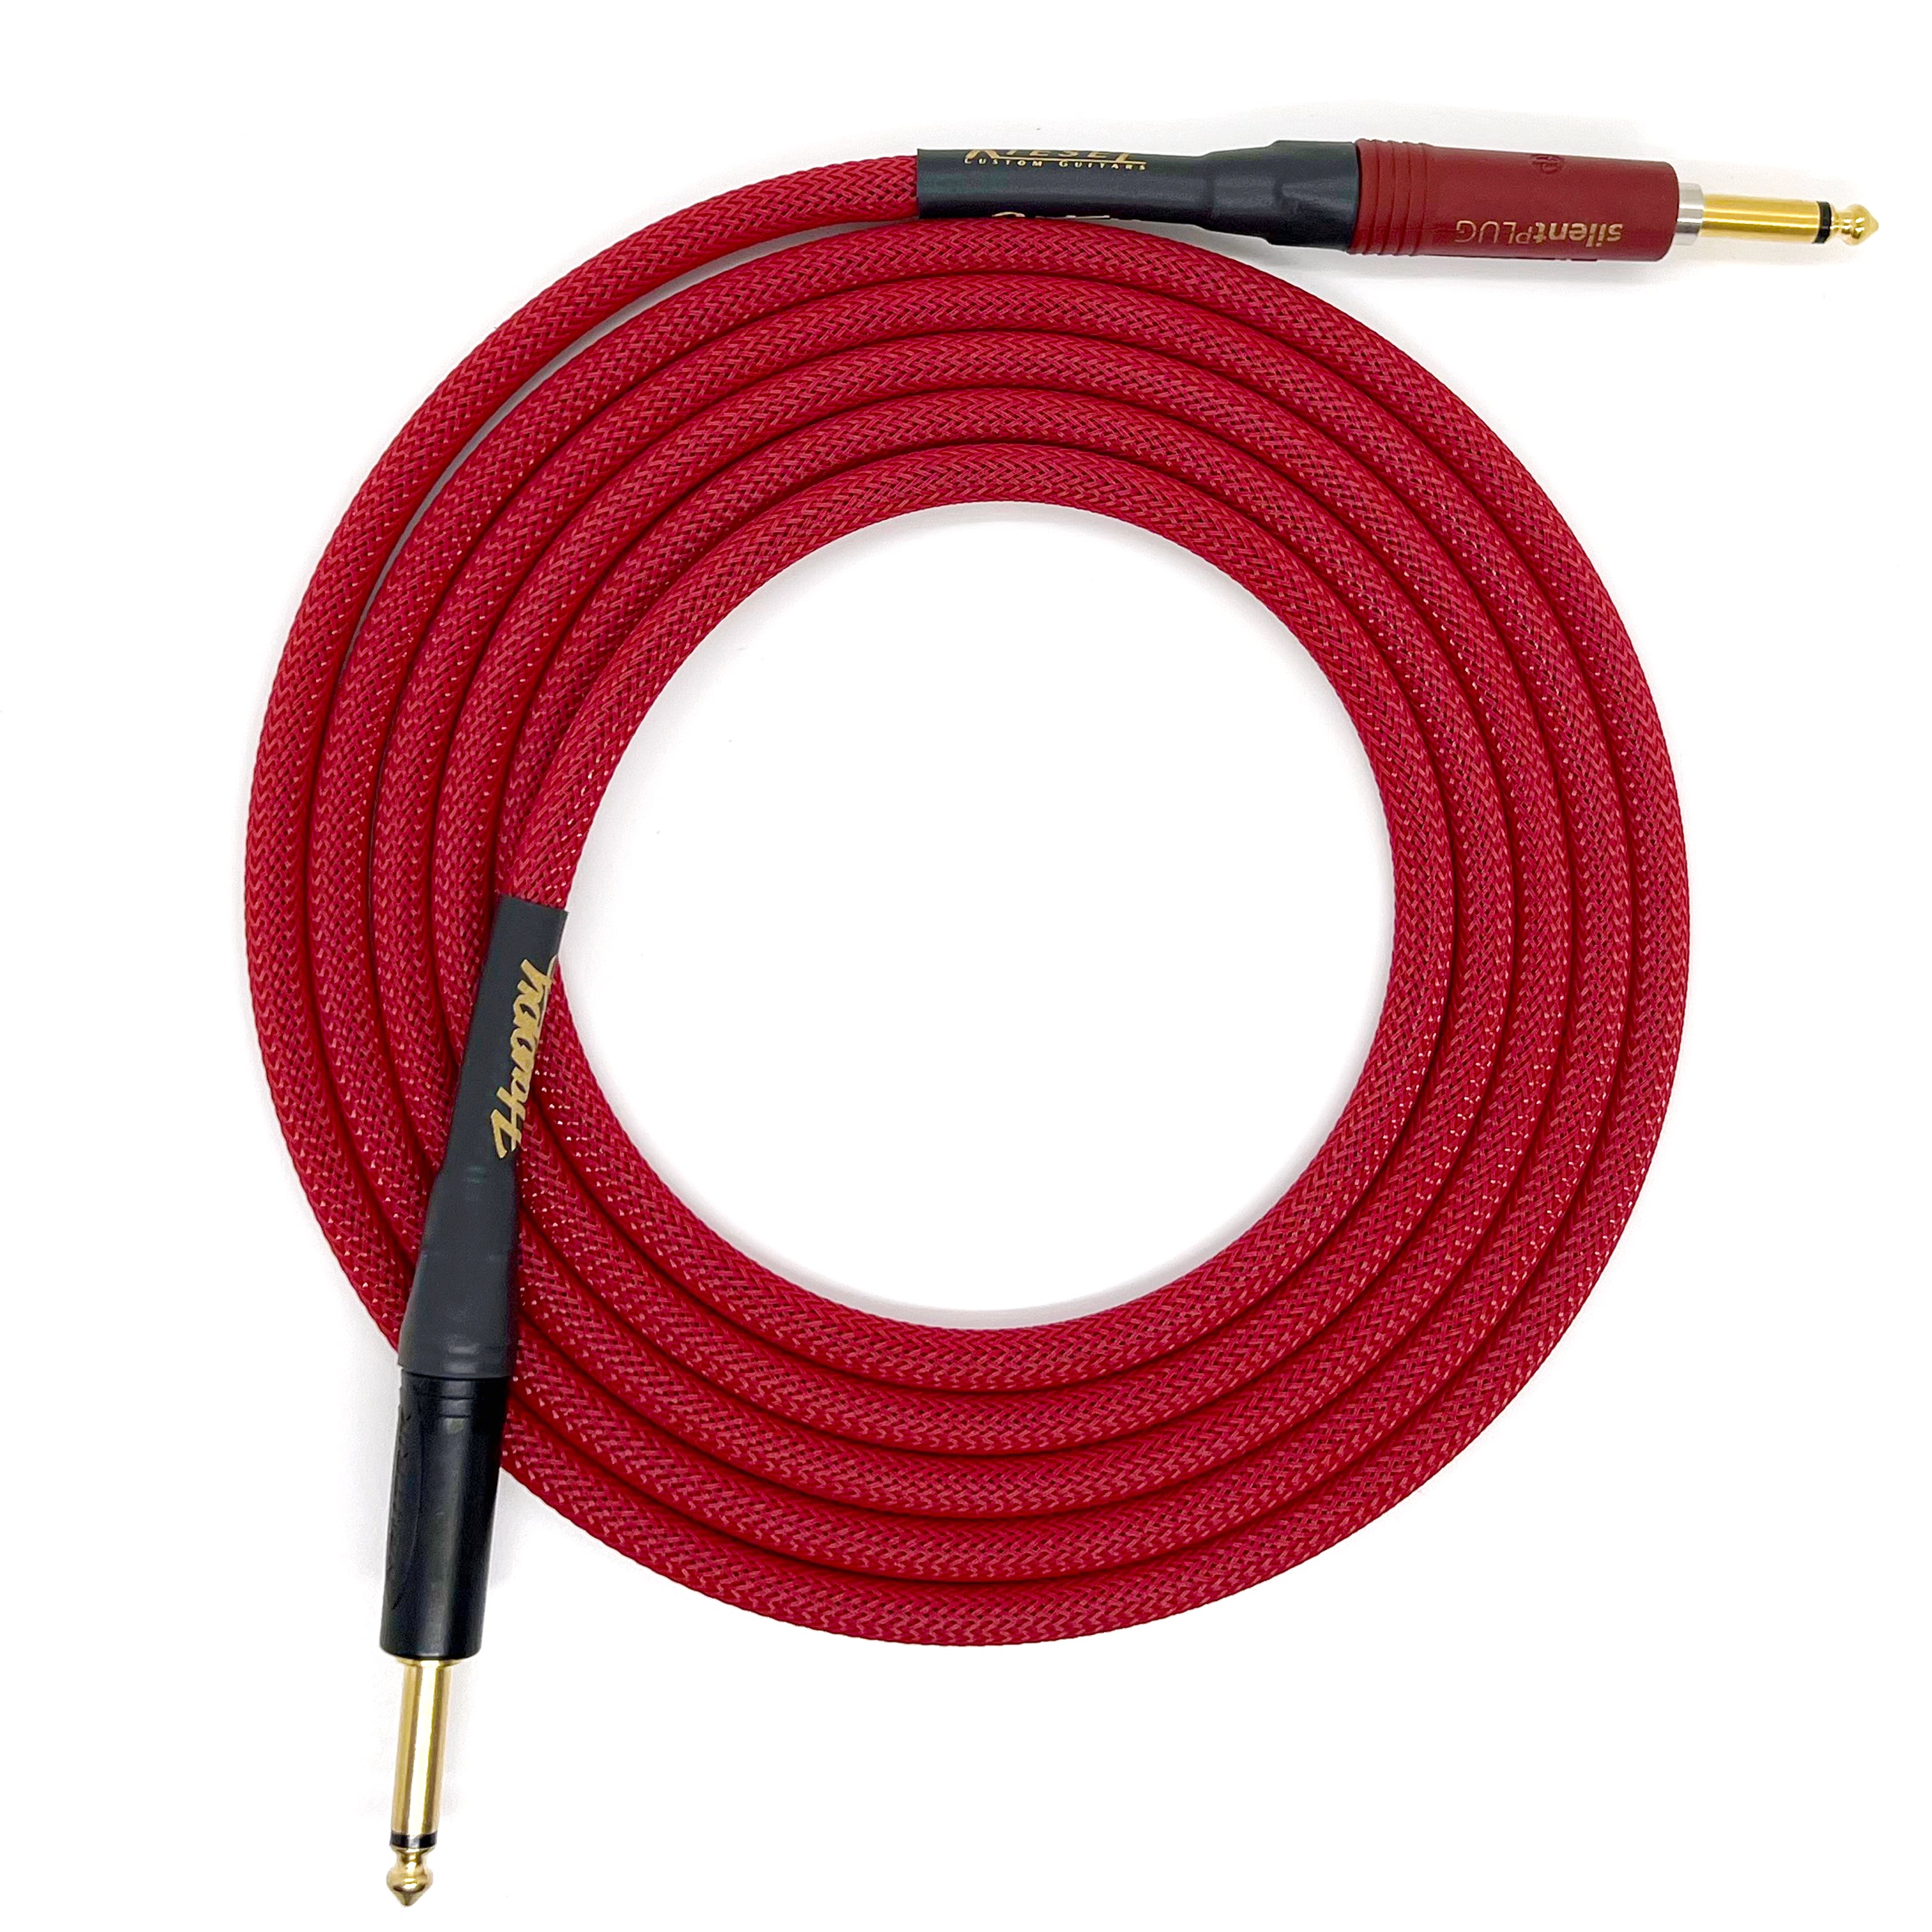 The Kiesel Silent Instrument Cable - Italian Red